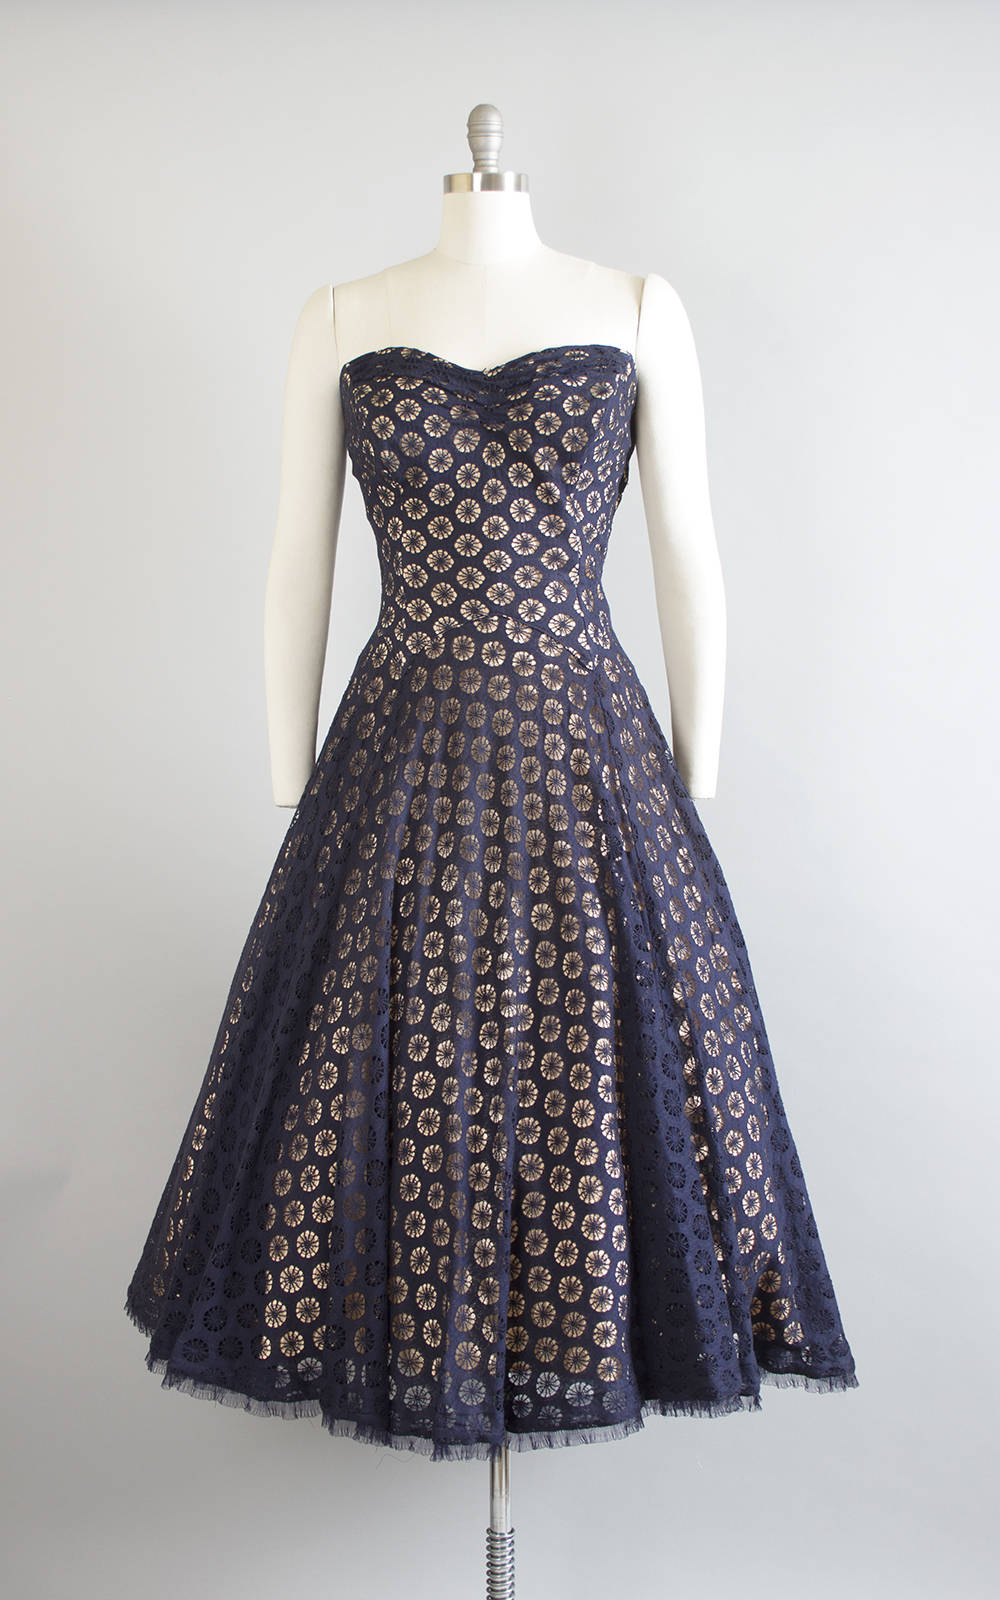 Vintage 1950s Dress | 50s Spiderweb Lace Party Dress Nude Illusion Navy Blue Strapless Drop Waist Circle Skirt Evening Gown (medium)